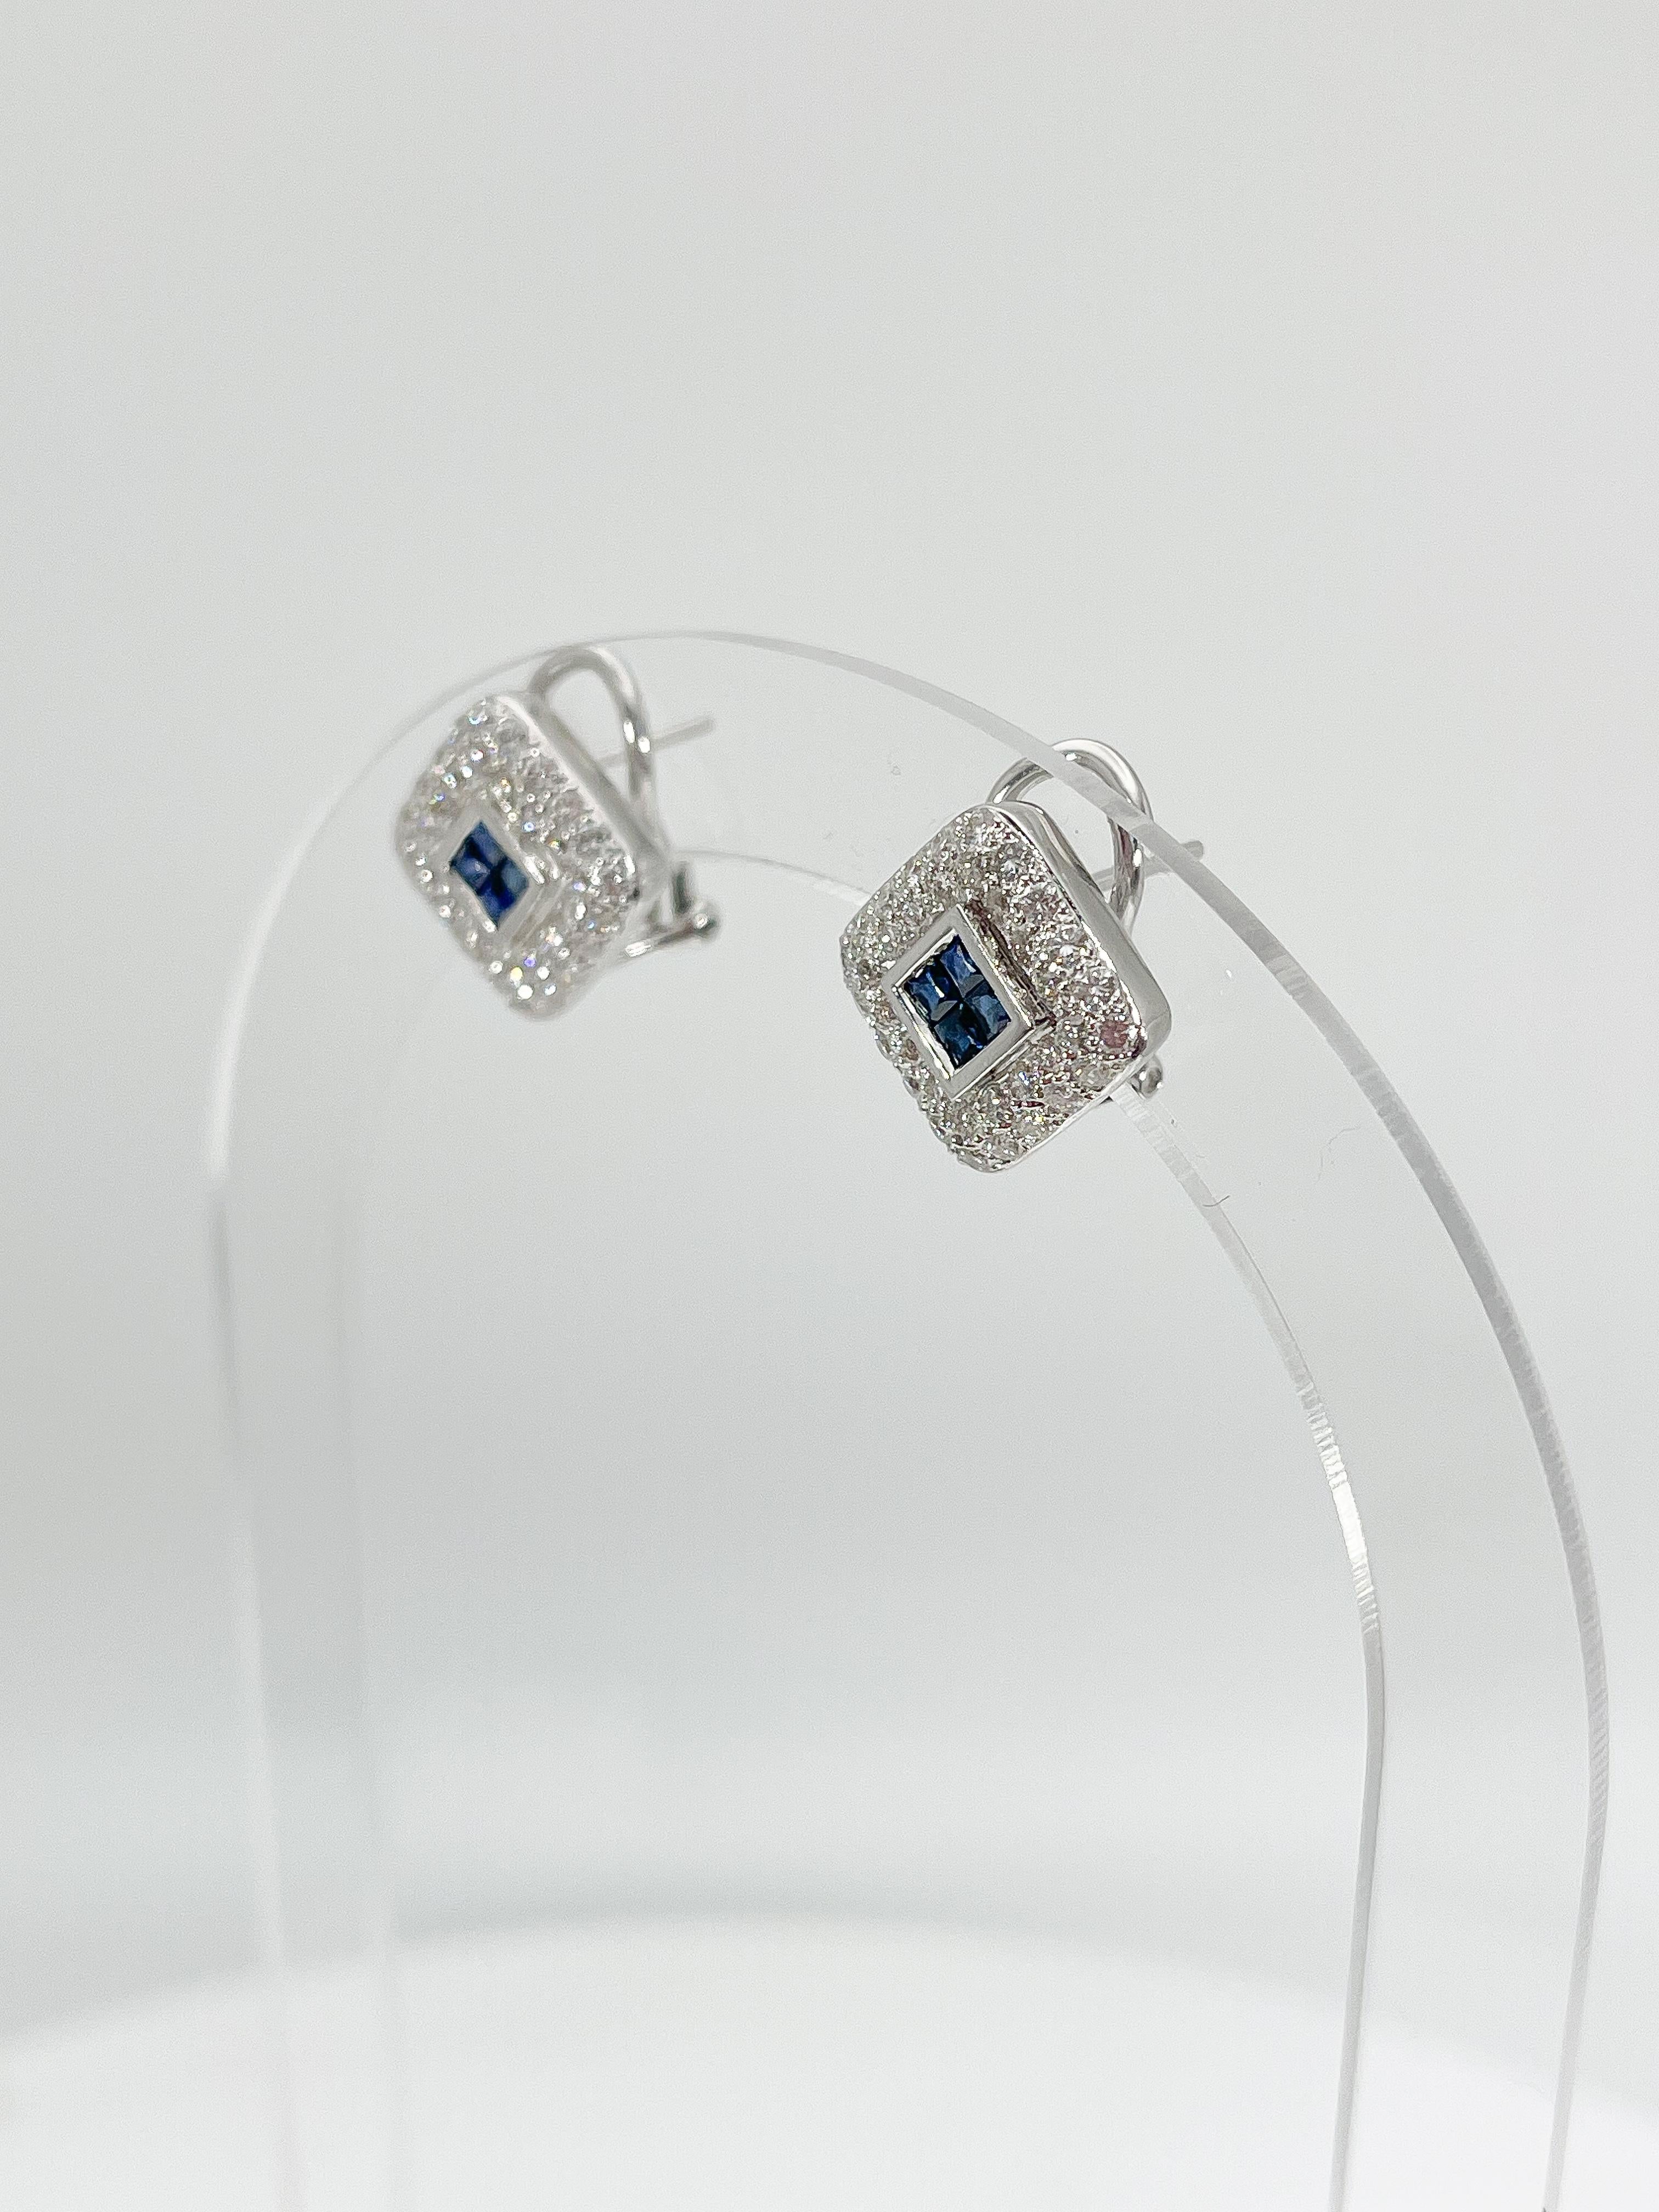 18K White Gold 1 CTW Sapphire and 1 CTW Diamond Earrings In Excellent Condition For Sale In Stuart, FL